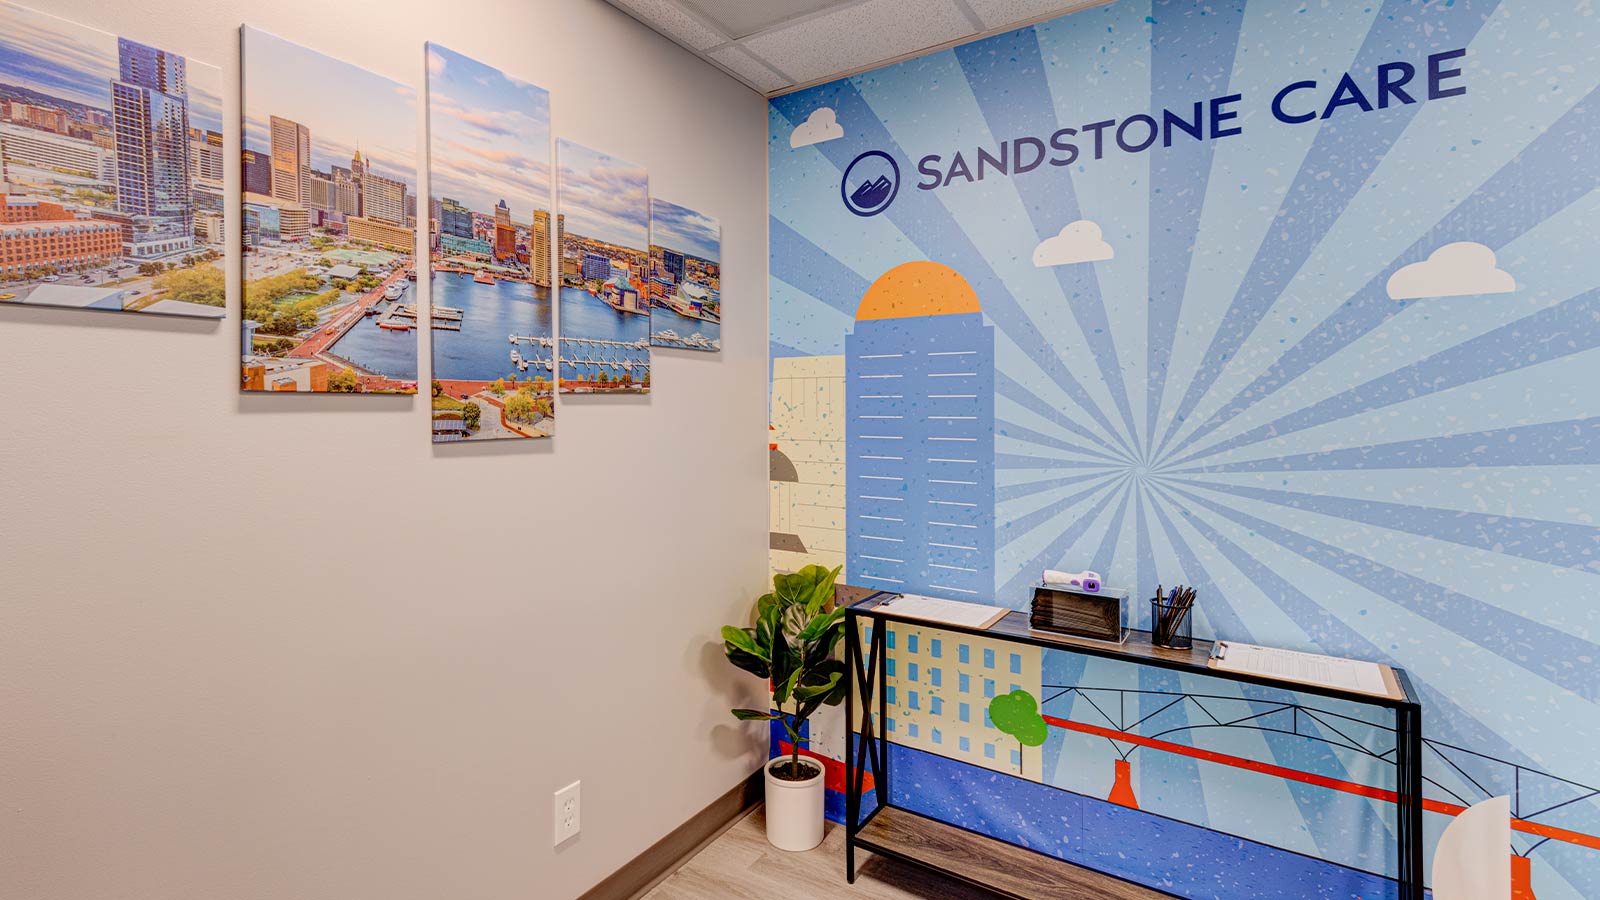 An interior wall decorated with a colorful mural and cityscape photographs, labeled "Sandstone Care."